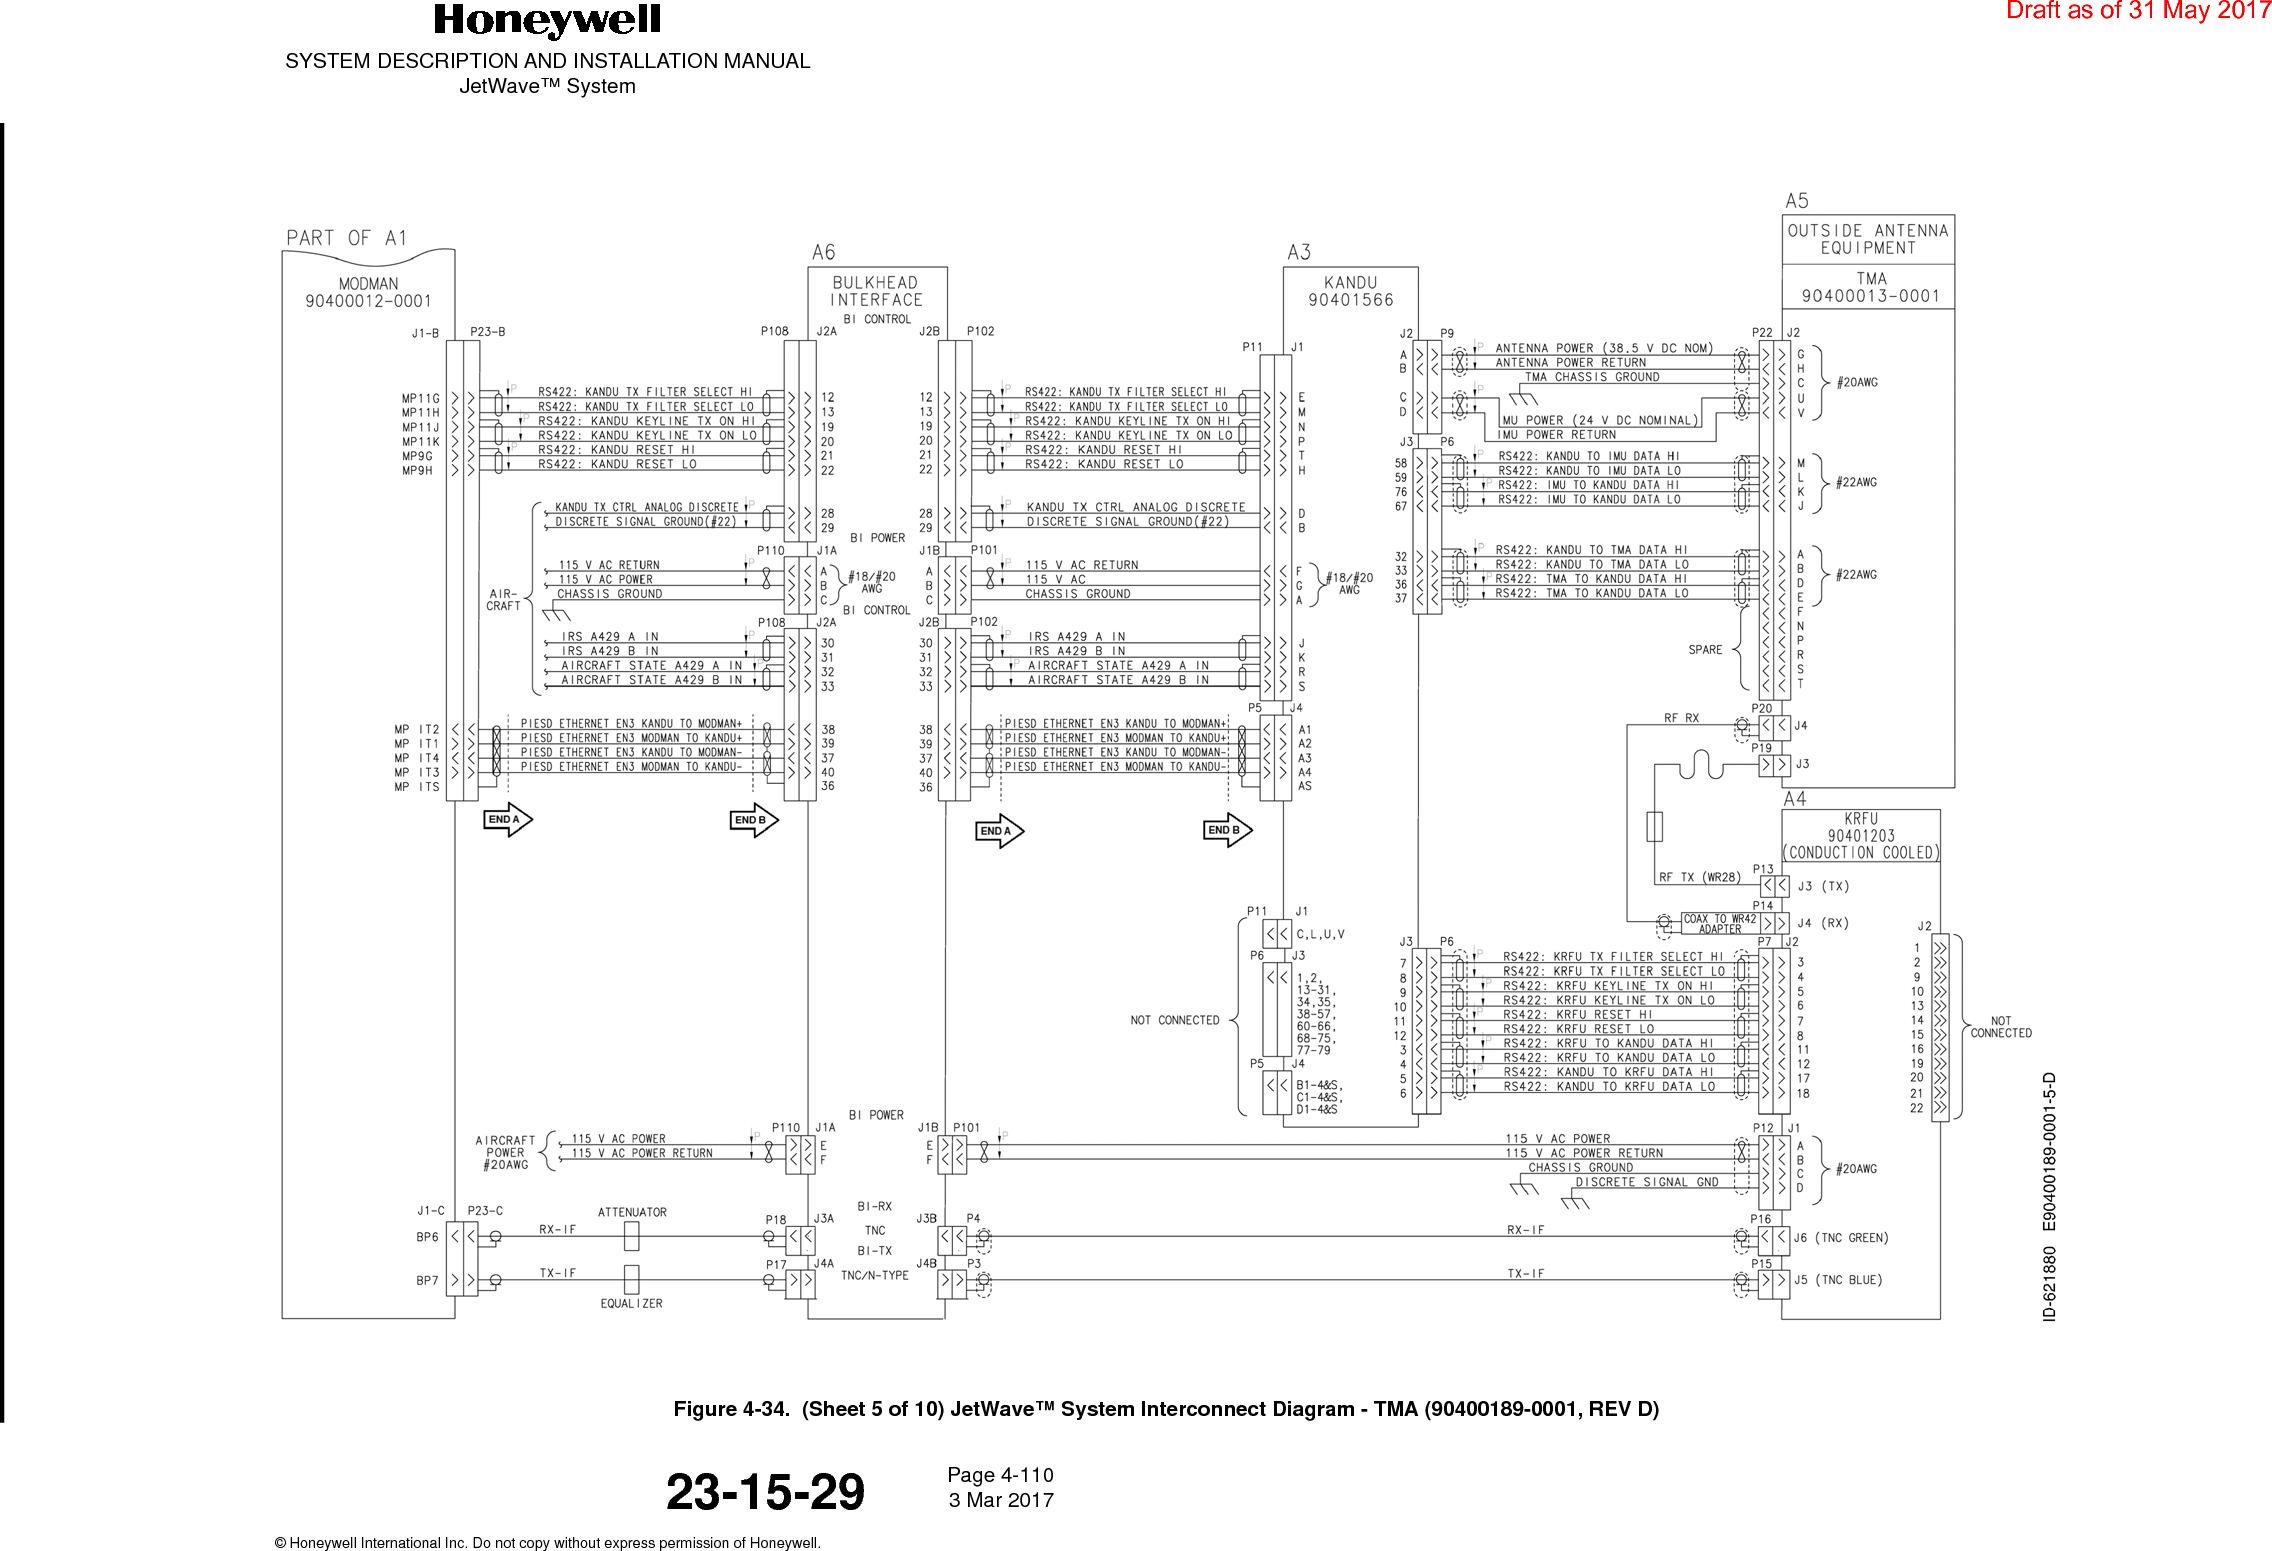 SYSTEM DESCRIPTION AND INSTALLATION MANUALJetWave™ SystemPage 4-110 3 Mar 2017© Honeywell International Inc. Do not copy without express permission of Honeywell.23-15-29Figure 4-34.  (Sheet 5 of 10) JetWave™ System Interconnect Diagram - TMA (90400189-0001, REV D)Draft as of 31 May 2017